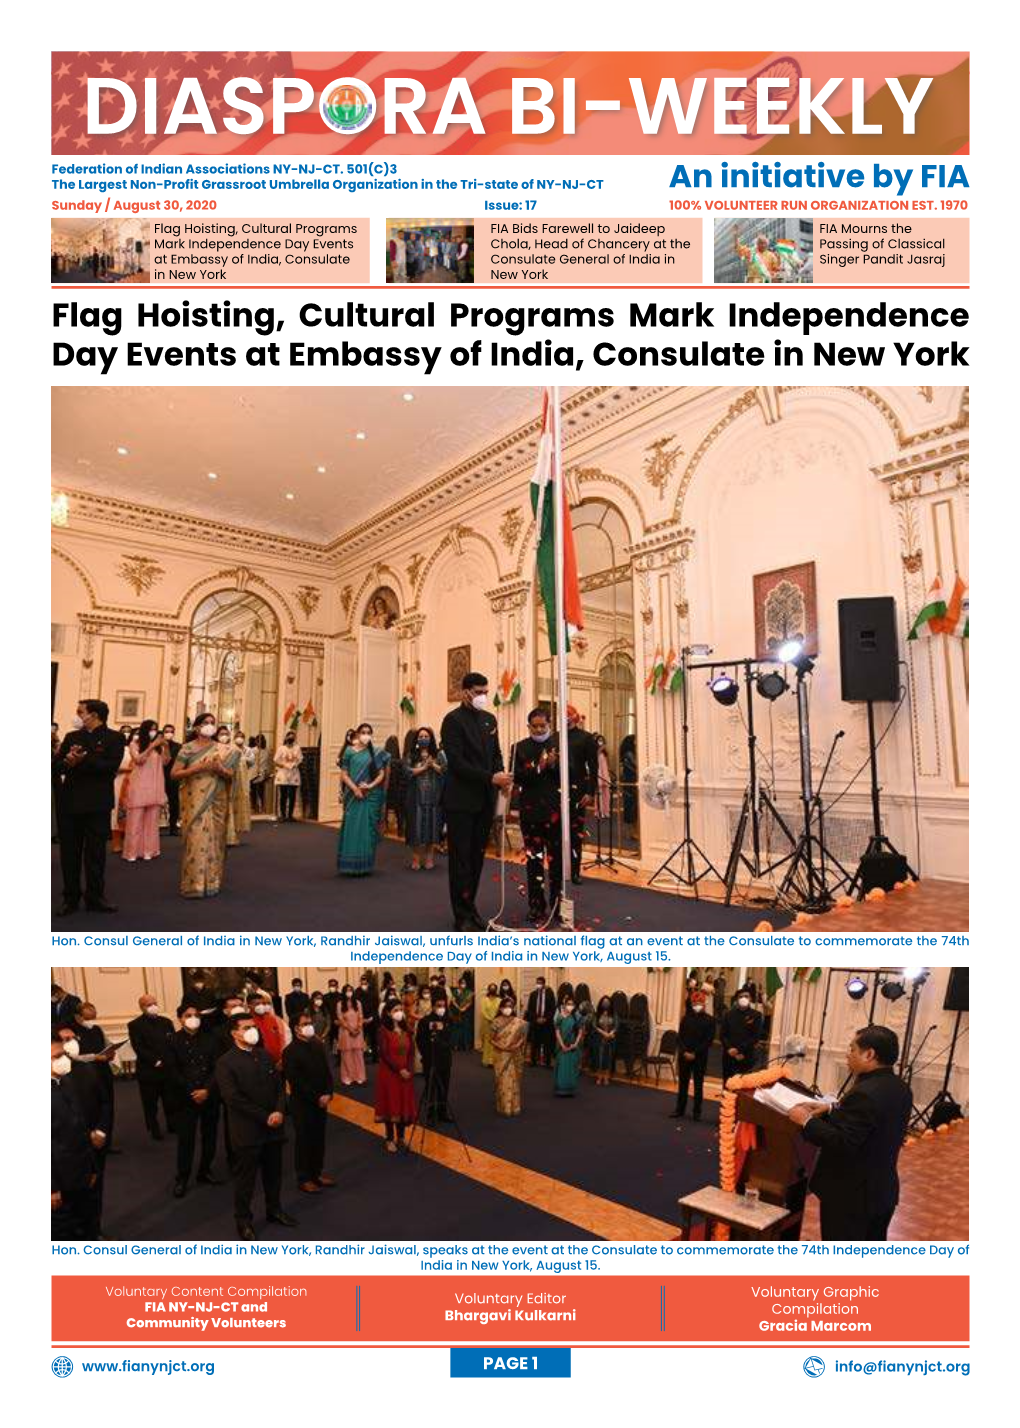 Flag Hoisting, Cultural Programs Mark Independence Day Events at Embassy of India, Consulate in New York